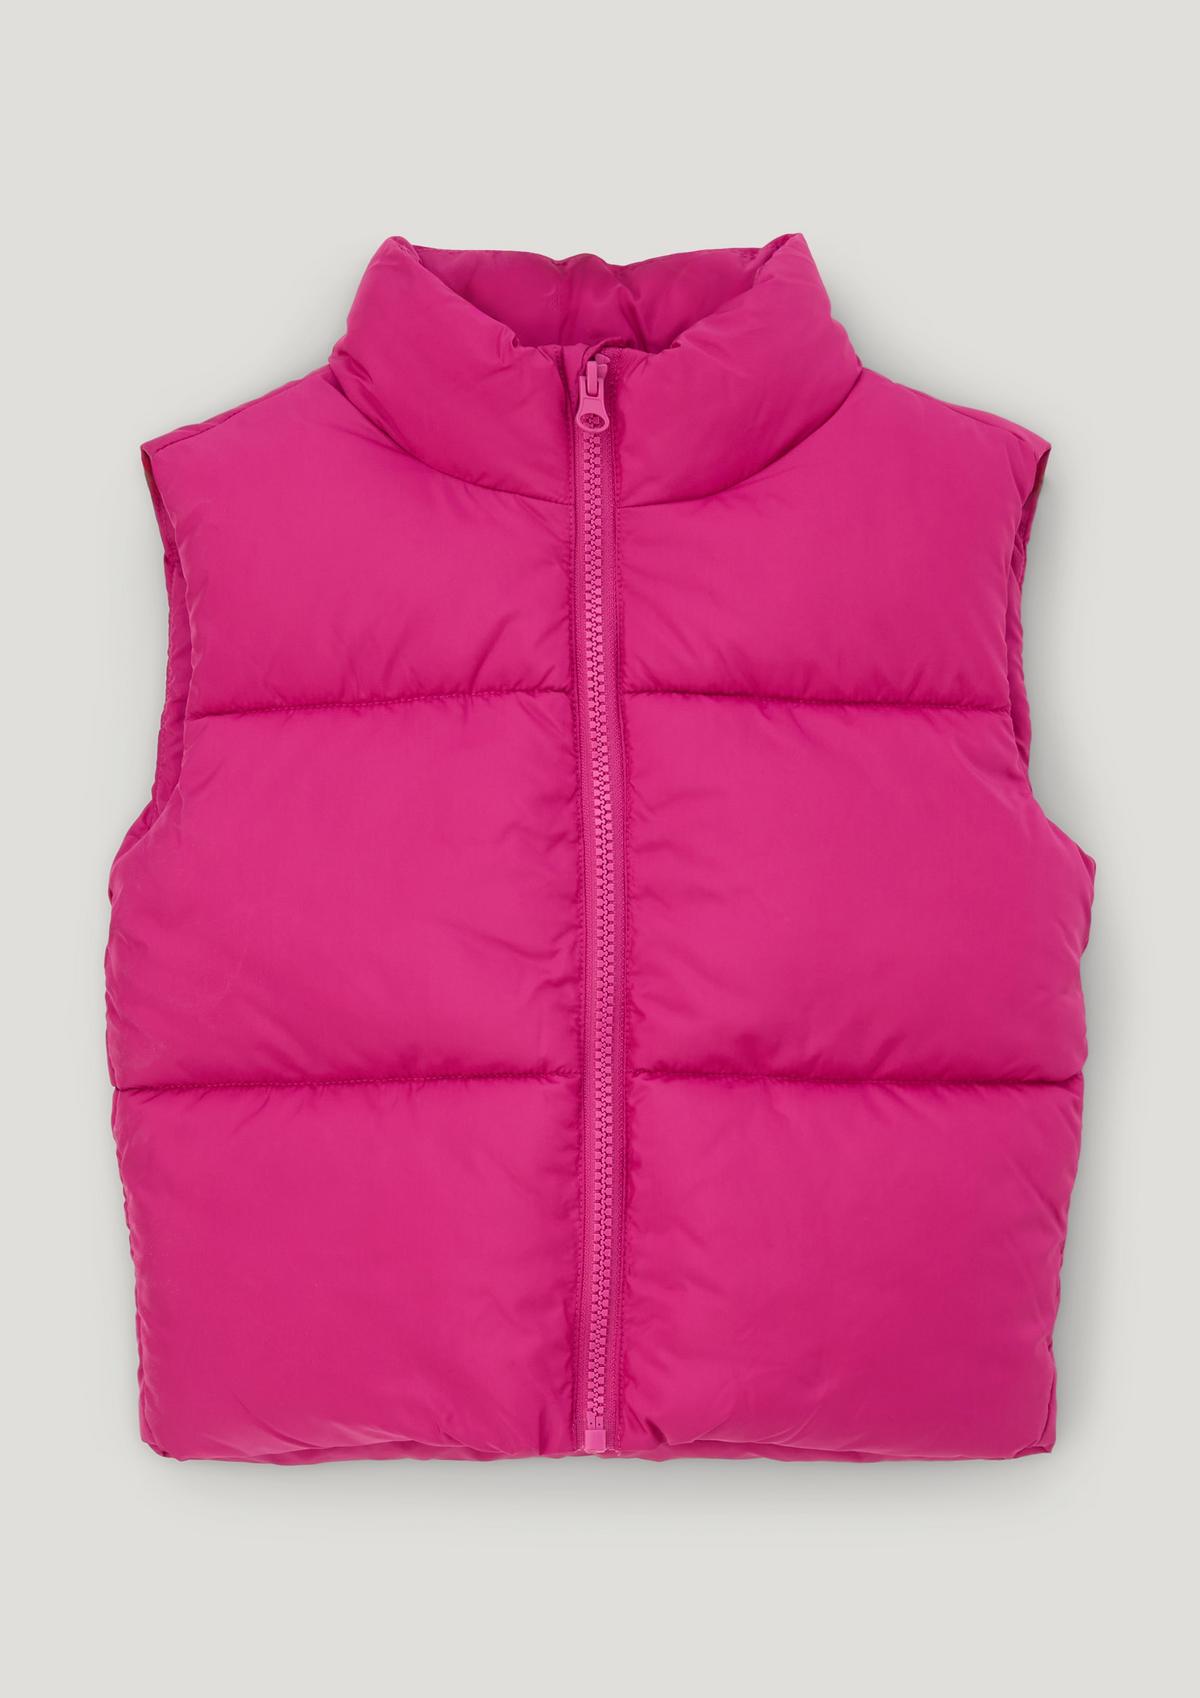 s.Oliver Reversible body warmer with quilting